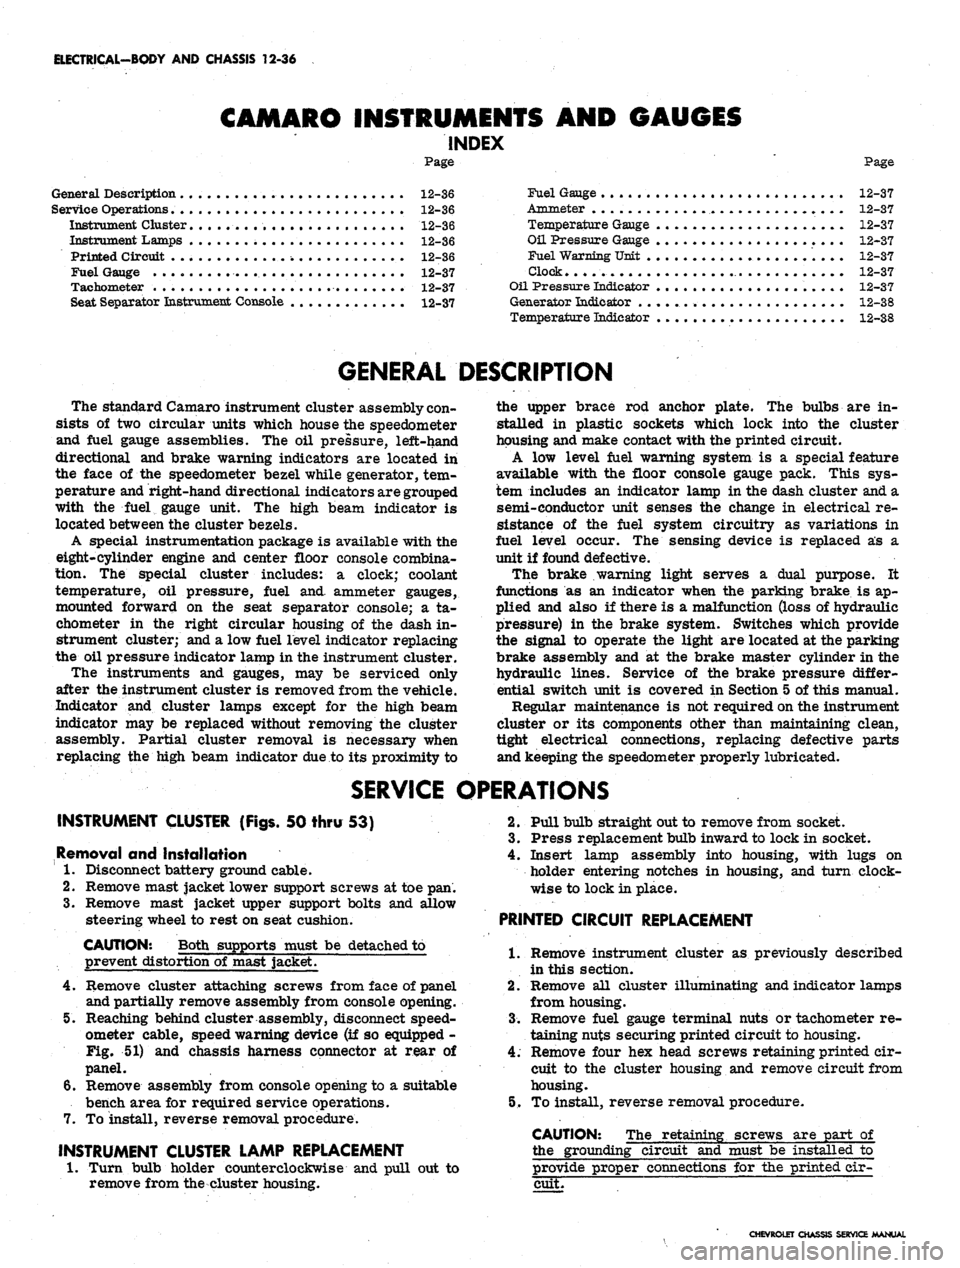 CHEVROLET CAMARO 1967 1.G Chassis Workshop Manual 
ELECTRICAL-BODY
 AND
 CHASSIS
 12-36

CAMARO INSTRUMENTS AND GAUGES

INDEX

Page

General Description
 12-36

Service Operations
 12-36

Instrument Cluster
 . . . 12-36

Instrument Lamps
 12-36

Prin